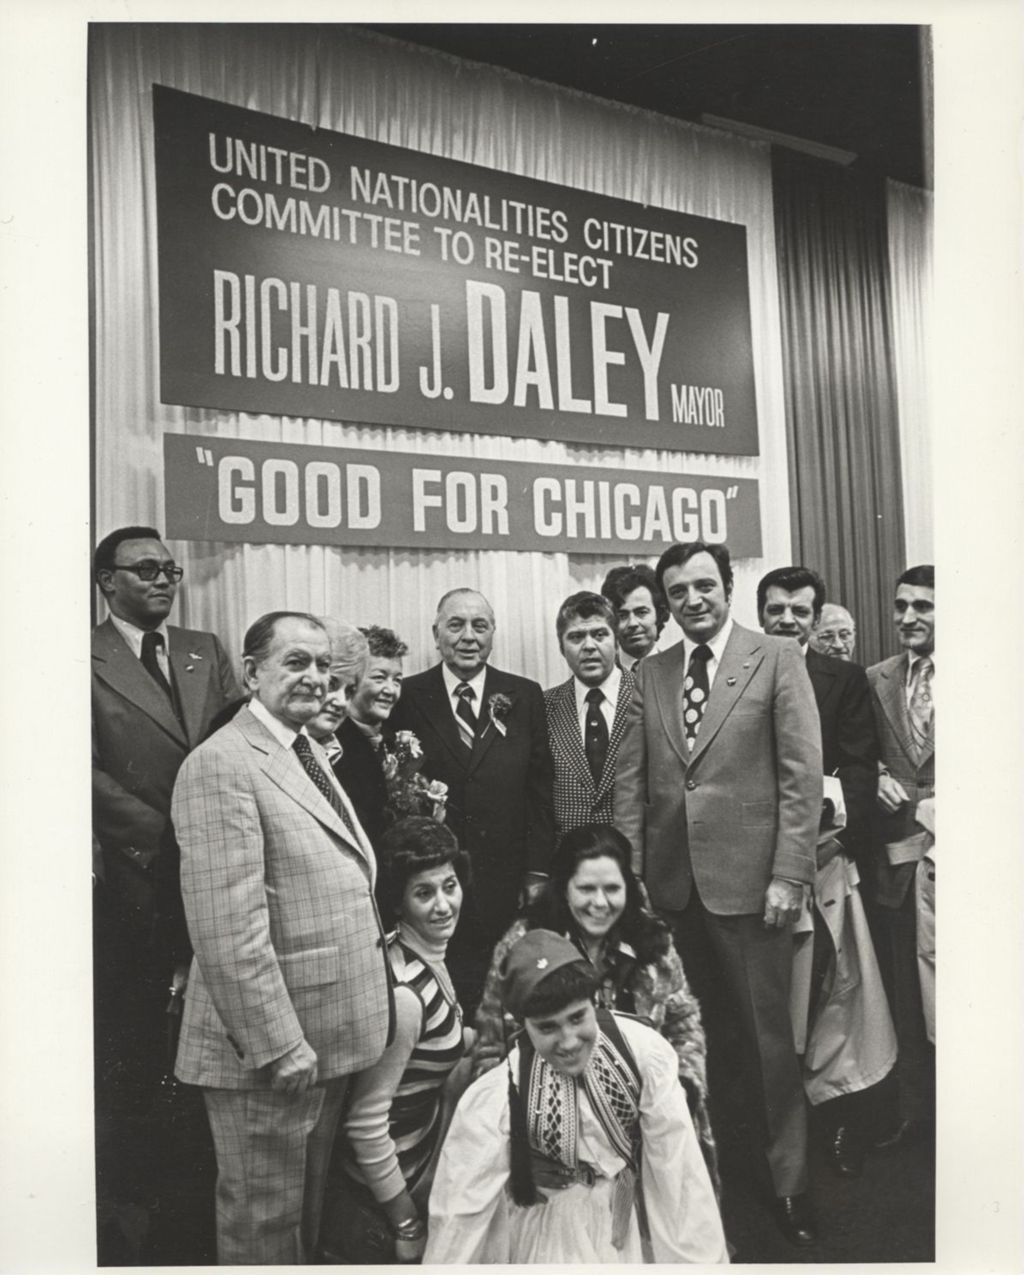 Richard J. and Eleanor Daley with others at a United Nationalities Citizens Committee campaign event